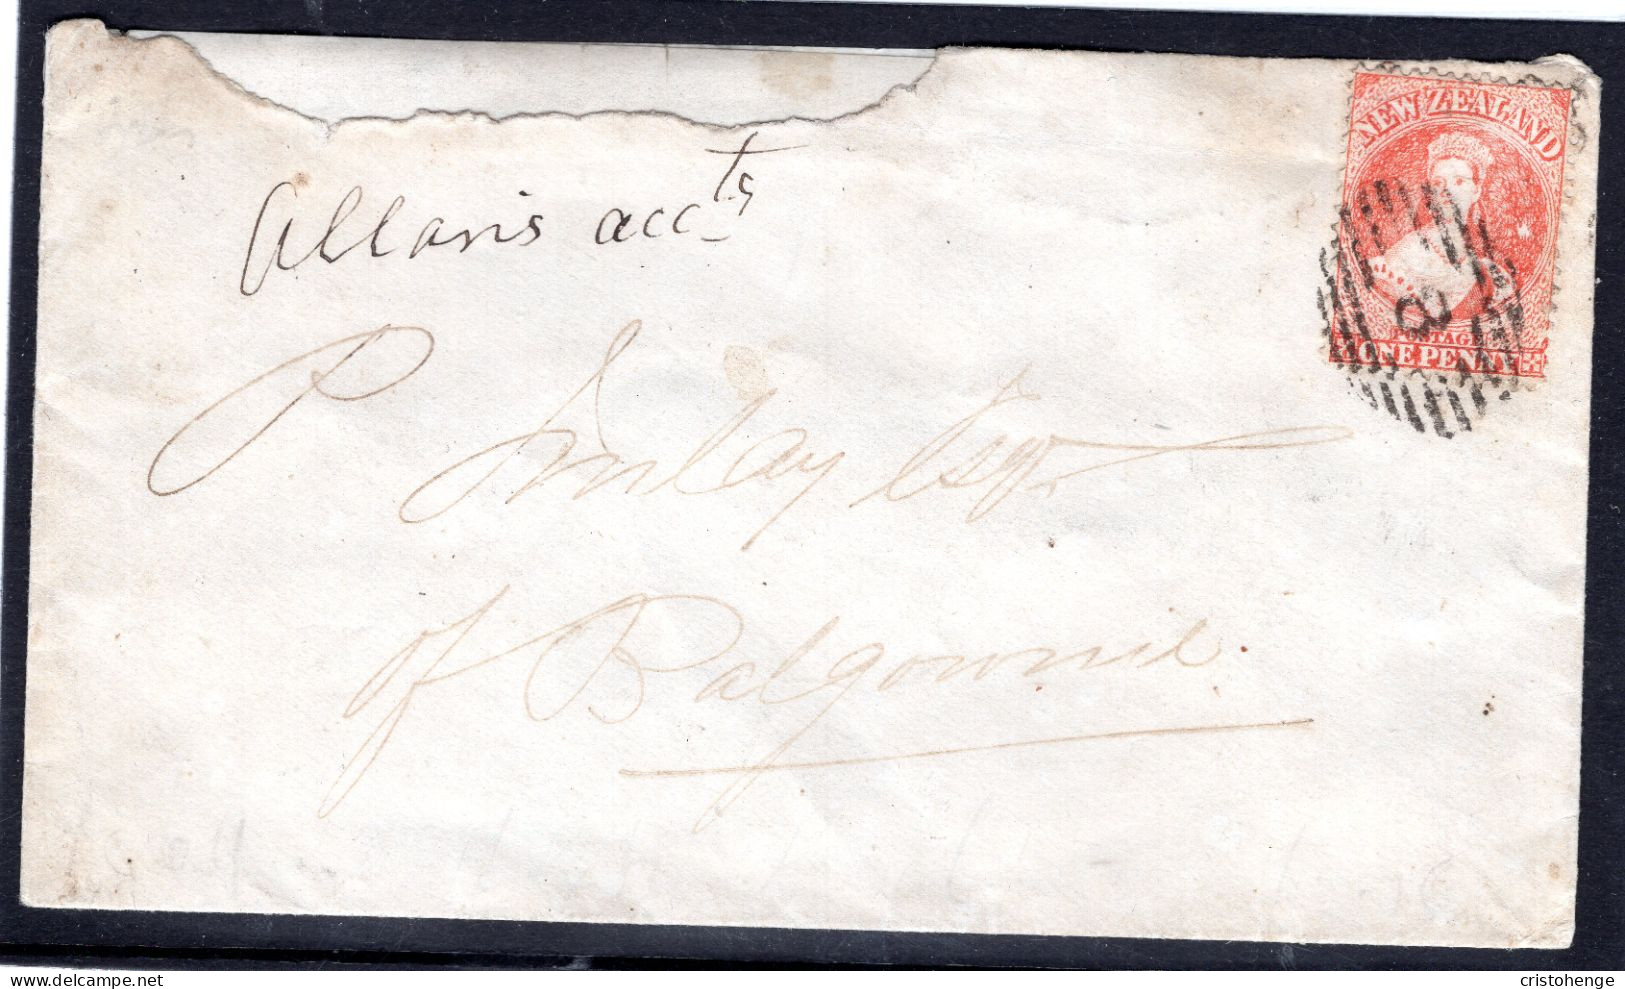 New Zealand 1869 1d Drop Rate FFQ Chalon Cover Sent Within Wanganui - Briefe U. Dokumente